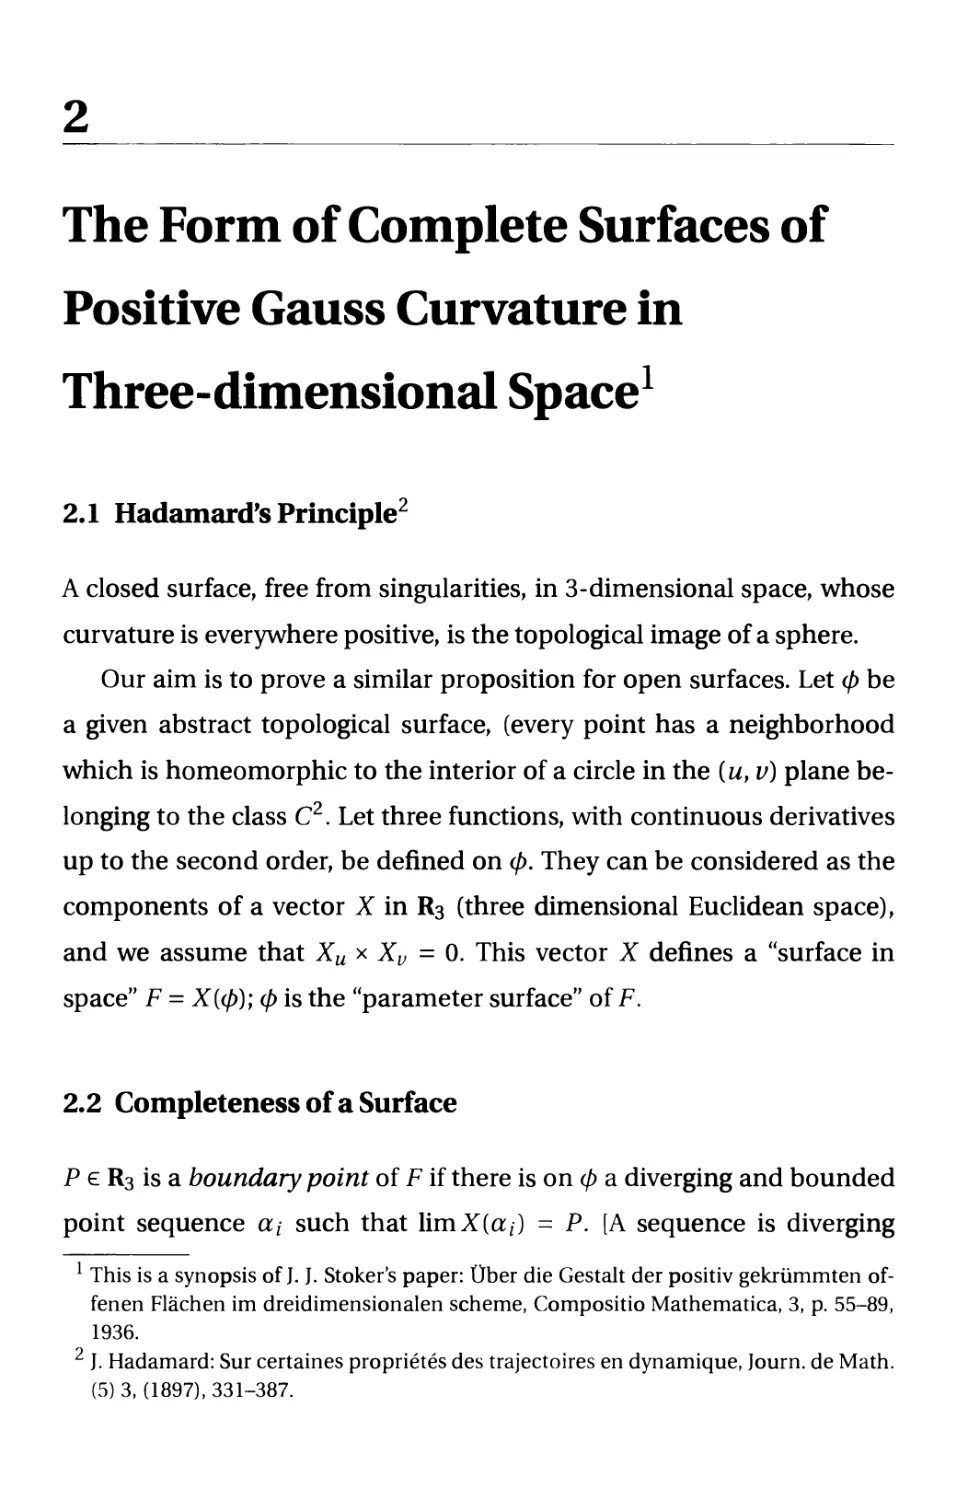 2. The Form of Complete Surfaces of Positive Gauss Curvature in Three-dimensional Space
2.1 Hadamard's Principle
2.2 Completeness of a Surface